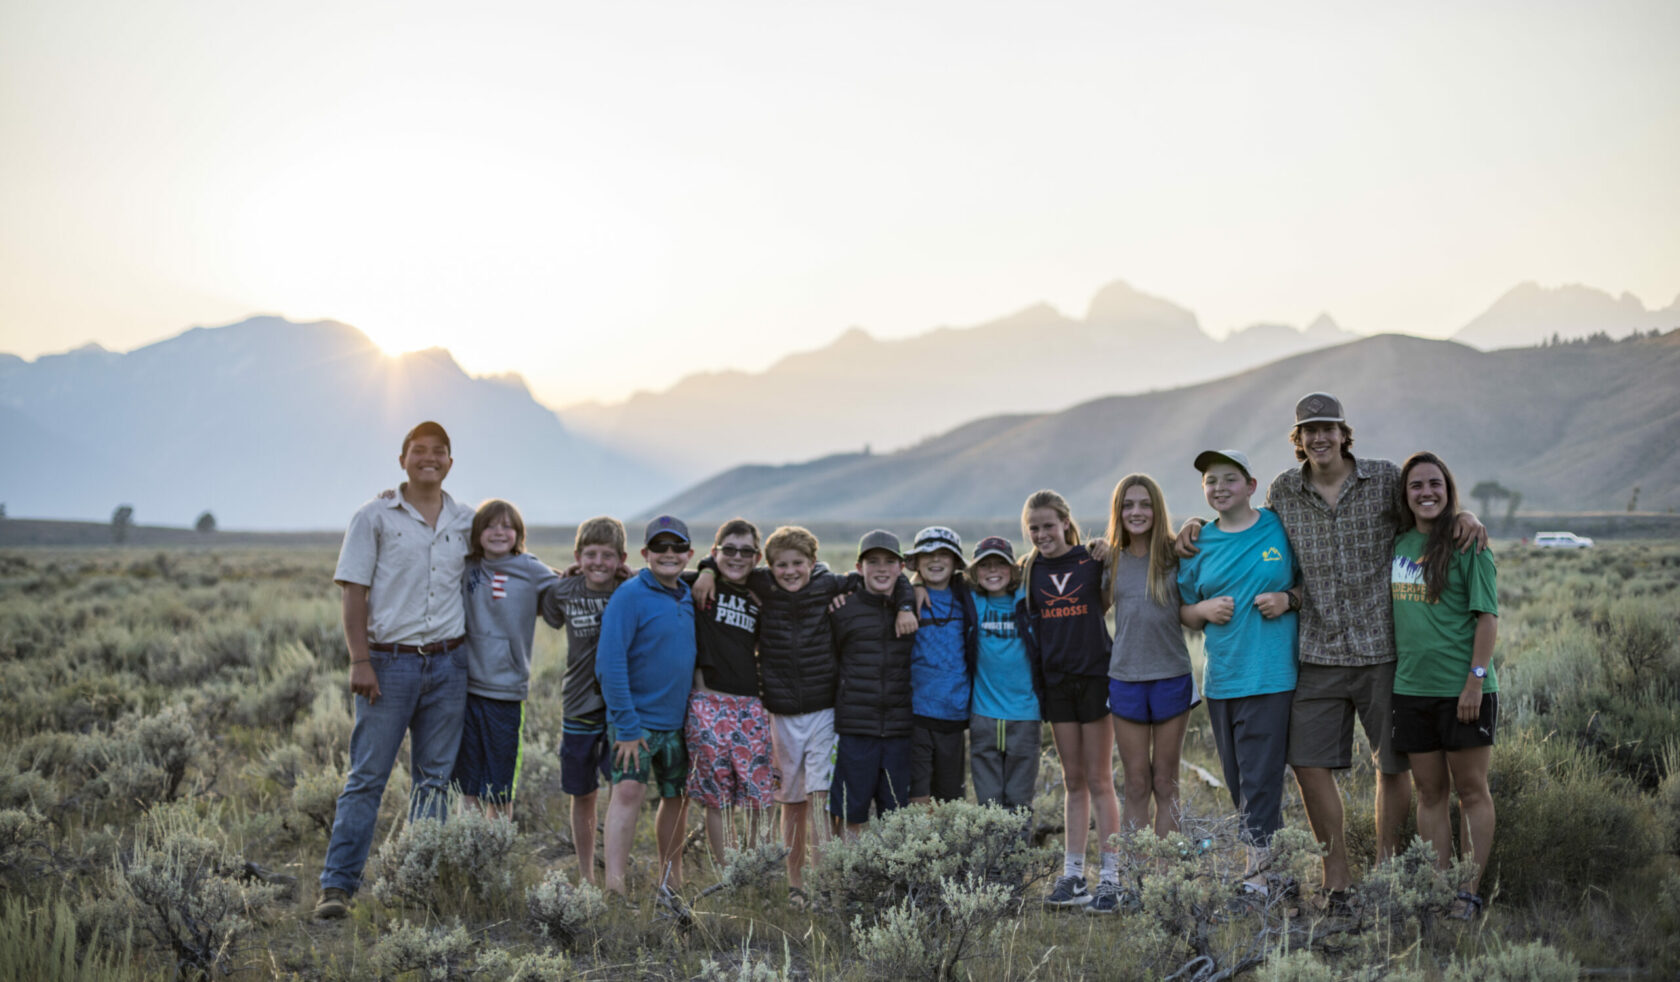 group in front of tetons at sunset